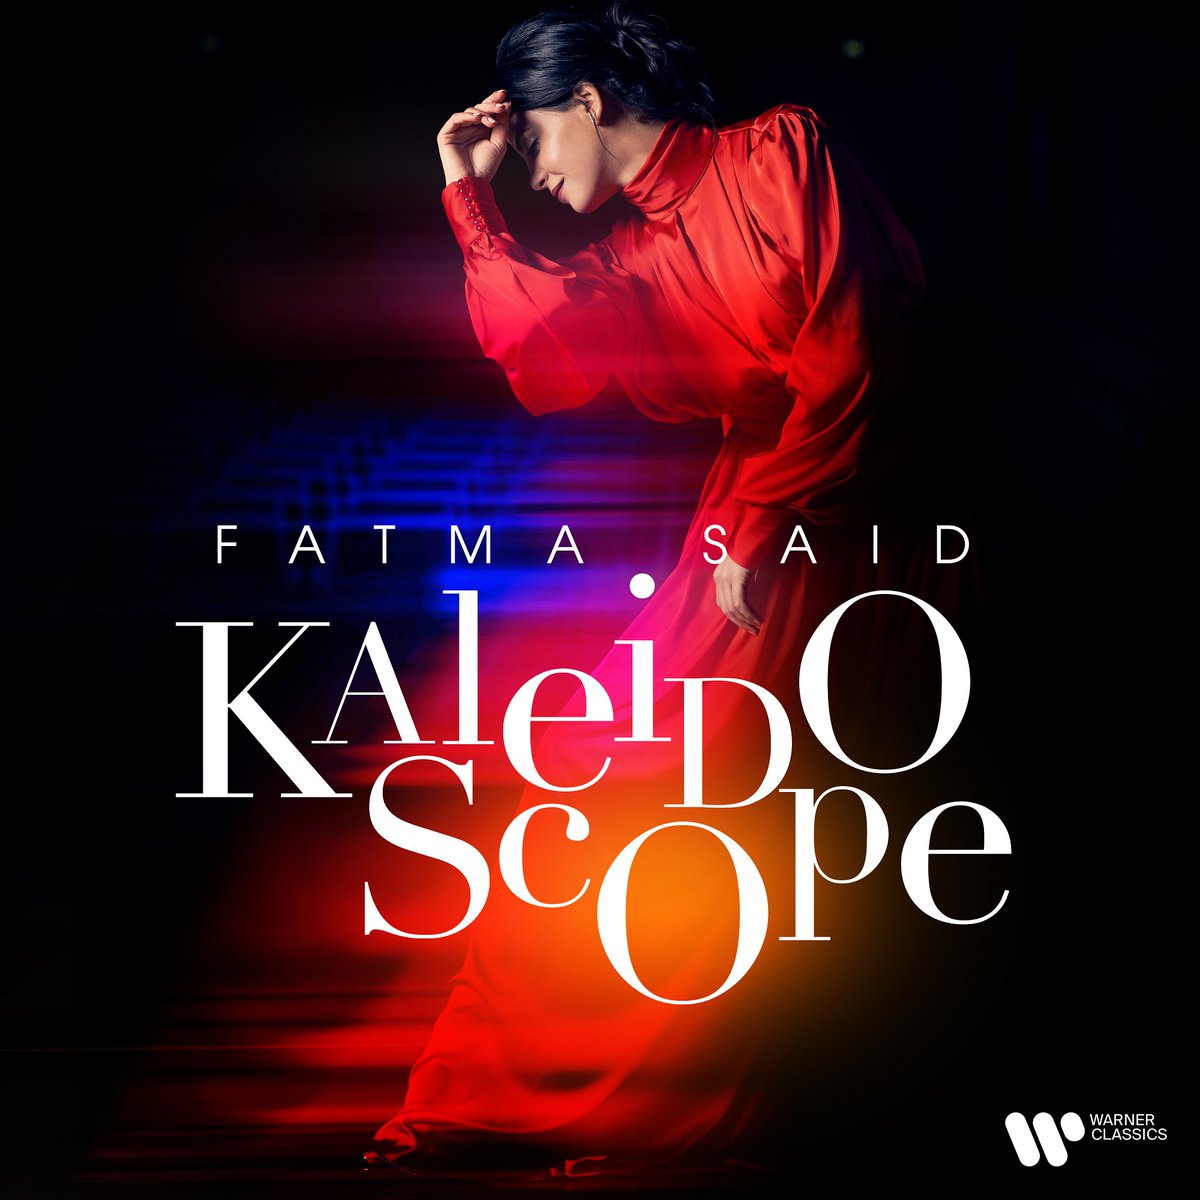 A colorful new addition to your vinyl collection (or a gift for a friend's! 💝) Discover @FatmaSaid's newest recording, Kaleidoscope, in lush LP format: w.lnk.to/kalTW